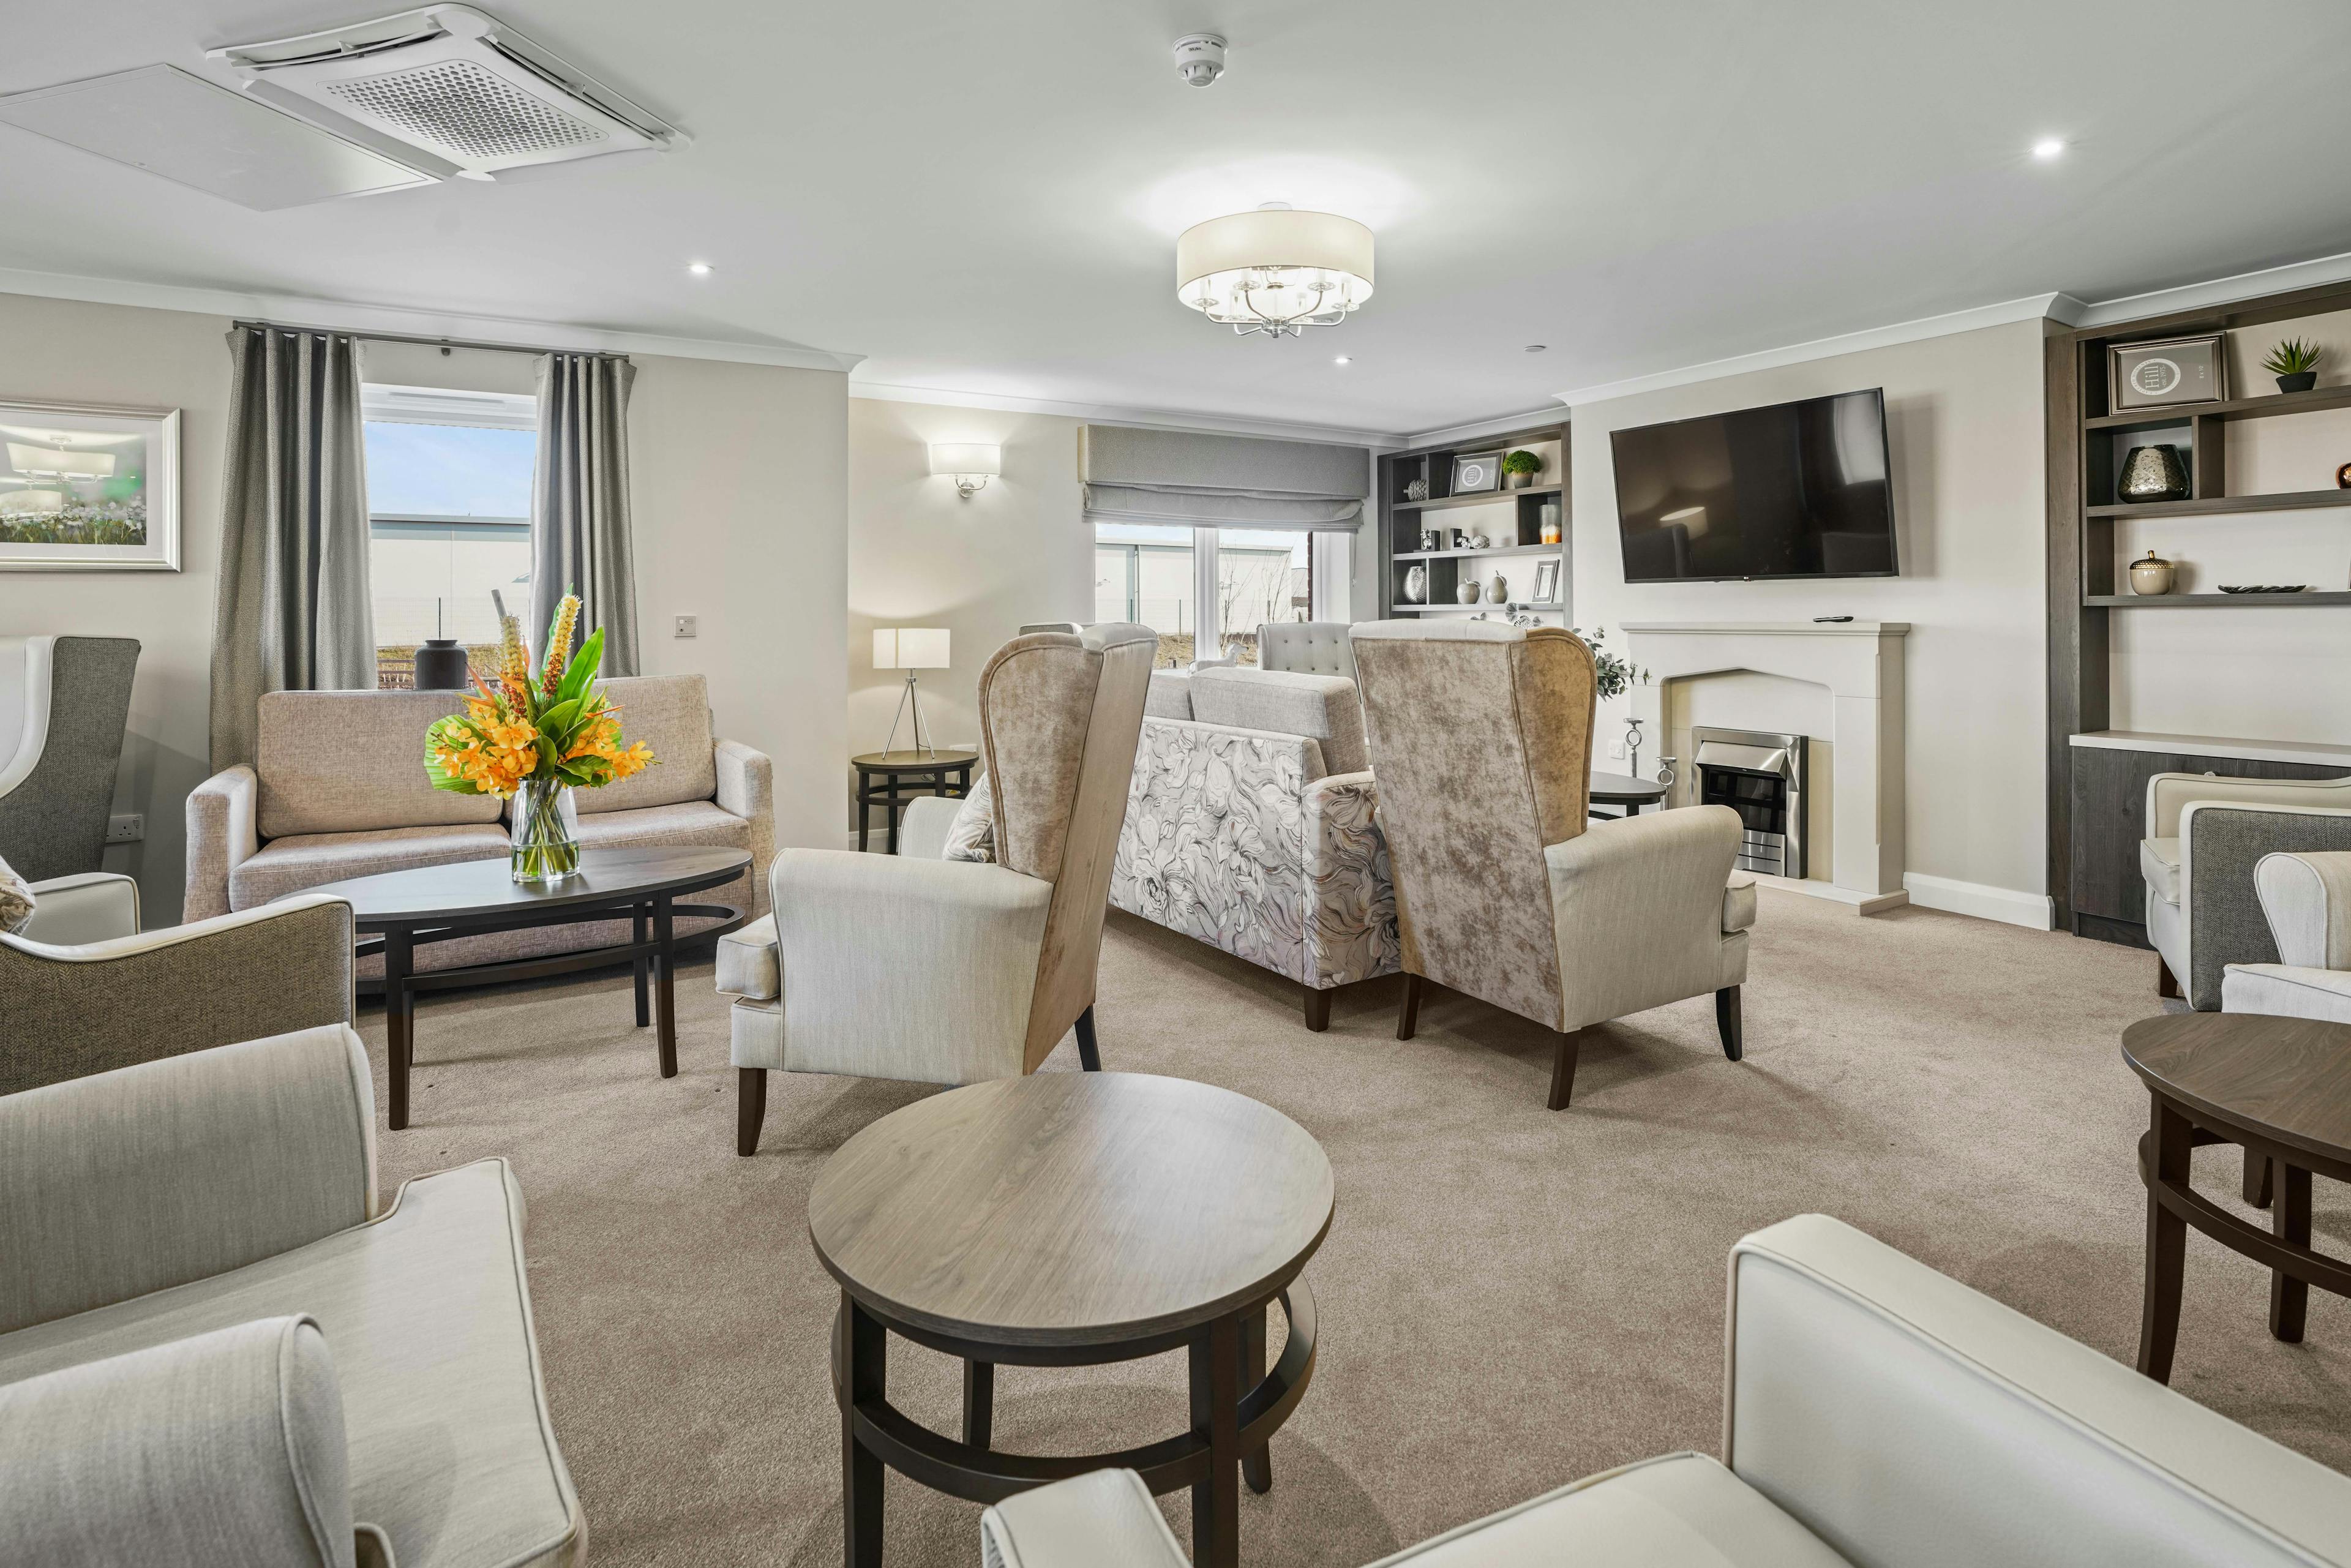 Lounge of Tanglewood care home in Horncastle, Lincolnshire